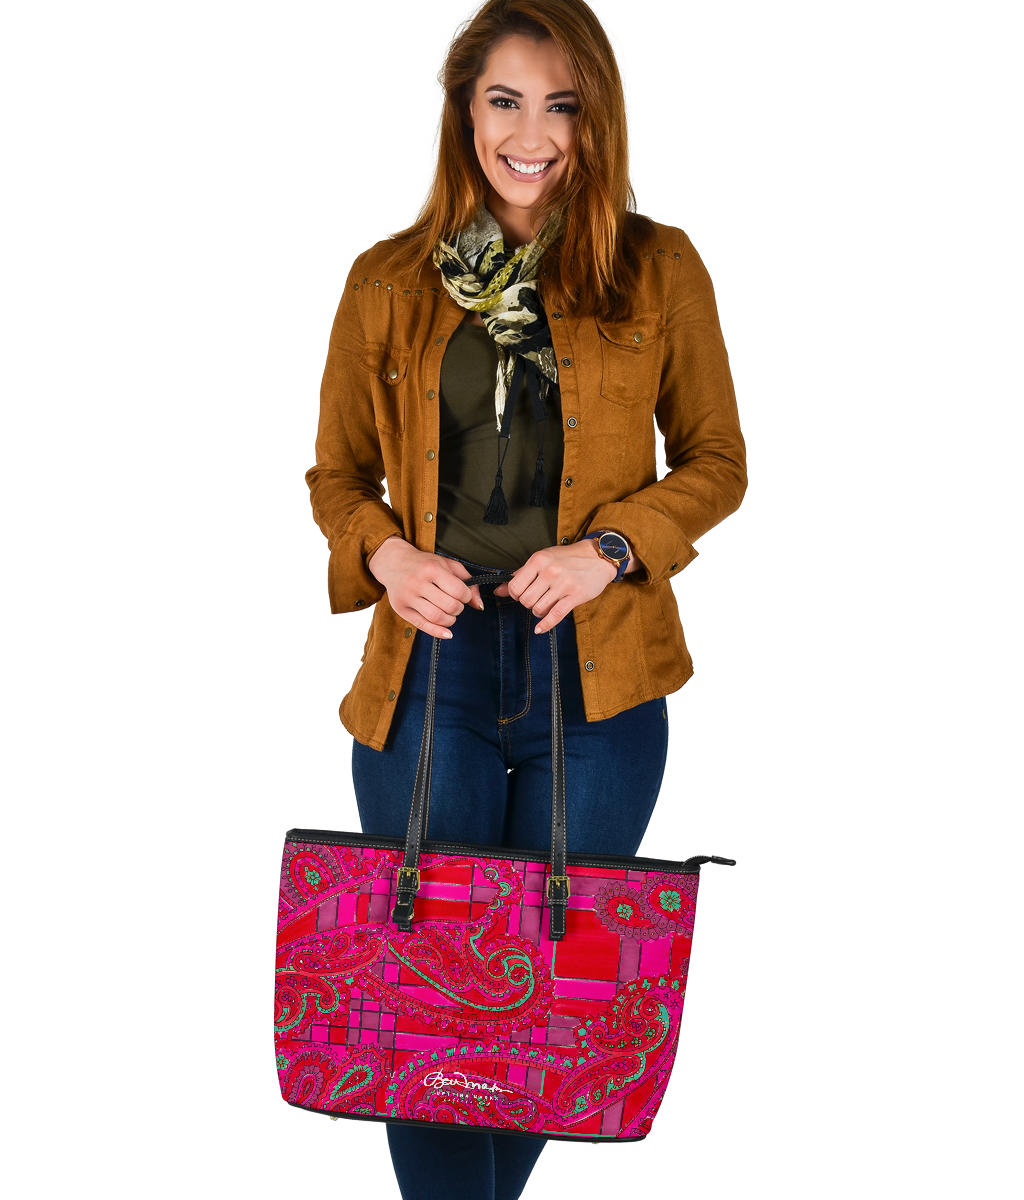 Bright Fuscia and Red Poppy Paisley on Plaid Large Tote Bag